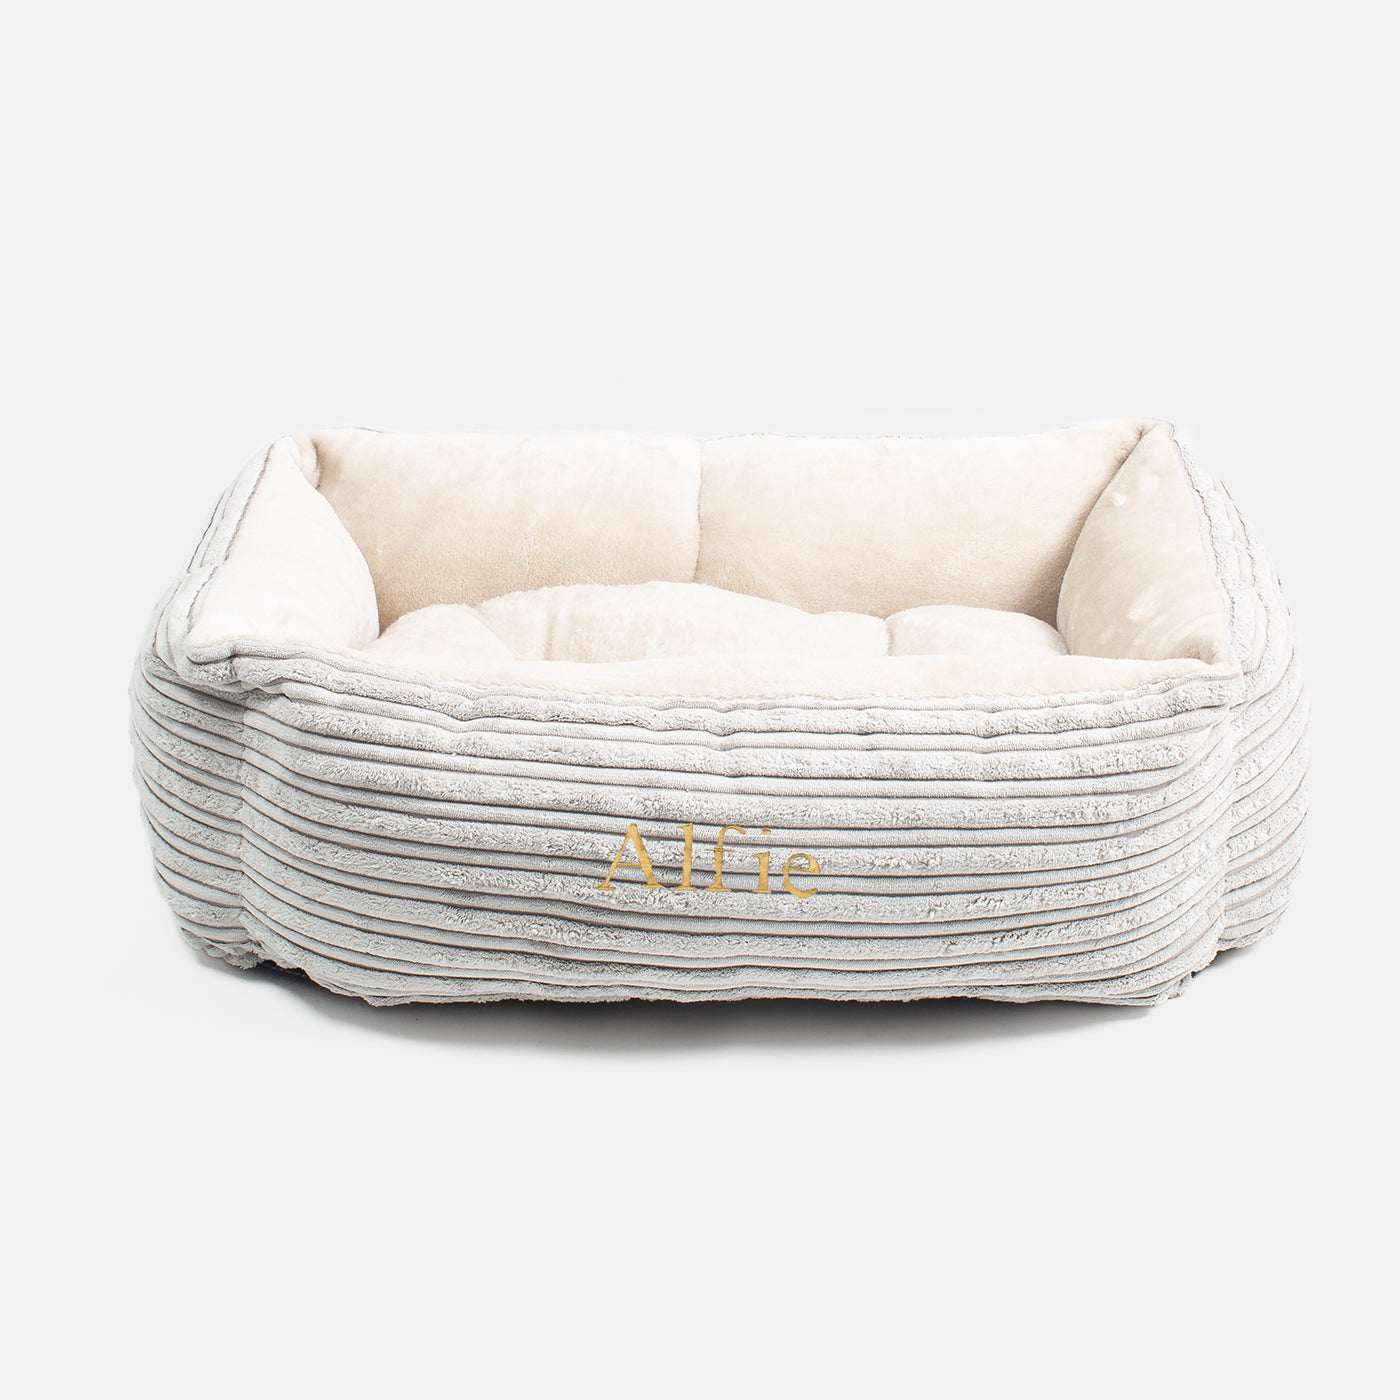  Cosy & Calm Puppy Crate Bed, The Perfect Dog Crate Accessory For The Ultimate Dog Den! In Stunning Light Grey Essentials Plush! Available Now at Lords & Labradors